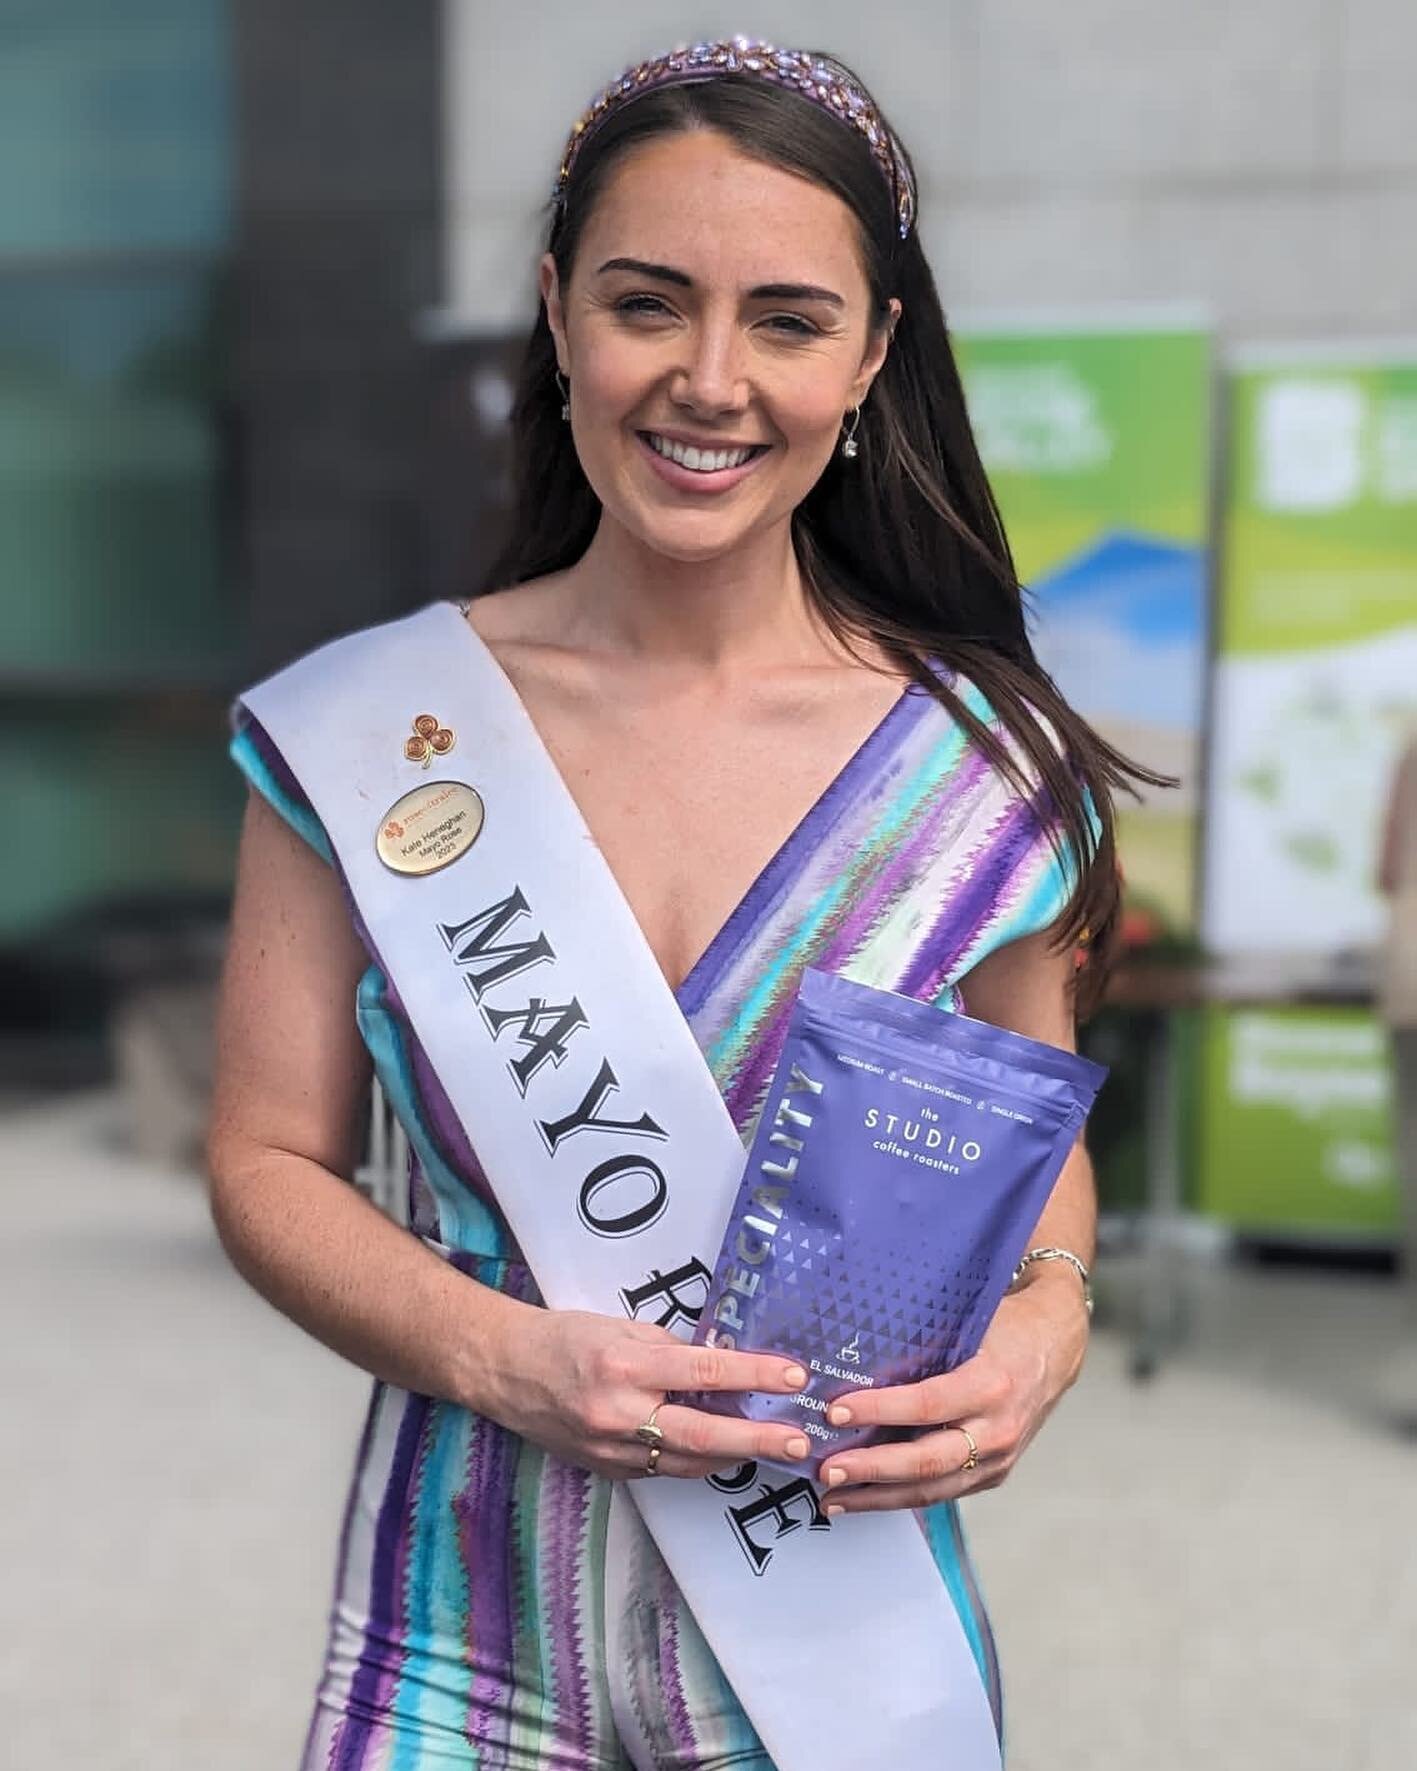 Great to be part of the meet the roses event @meathcoco today - meet the Mayo Rose - (Kate Heneghan) the early bookies favourite with our Great Taste award winning El Salvador coffee ☕️the perfect match #roseoftralee #specialitycoffee #meathrosetour2